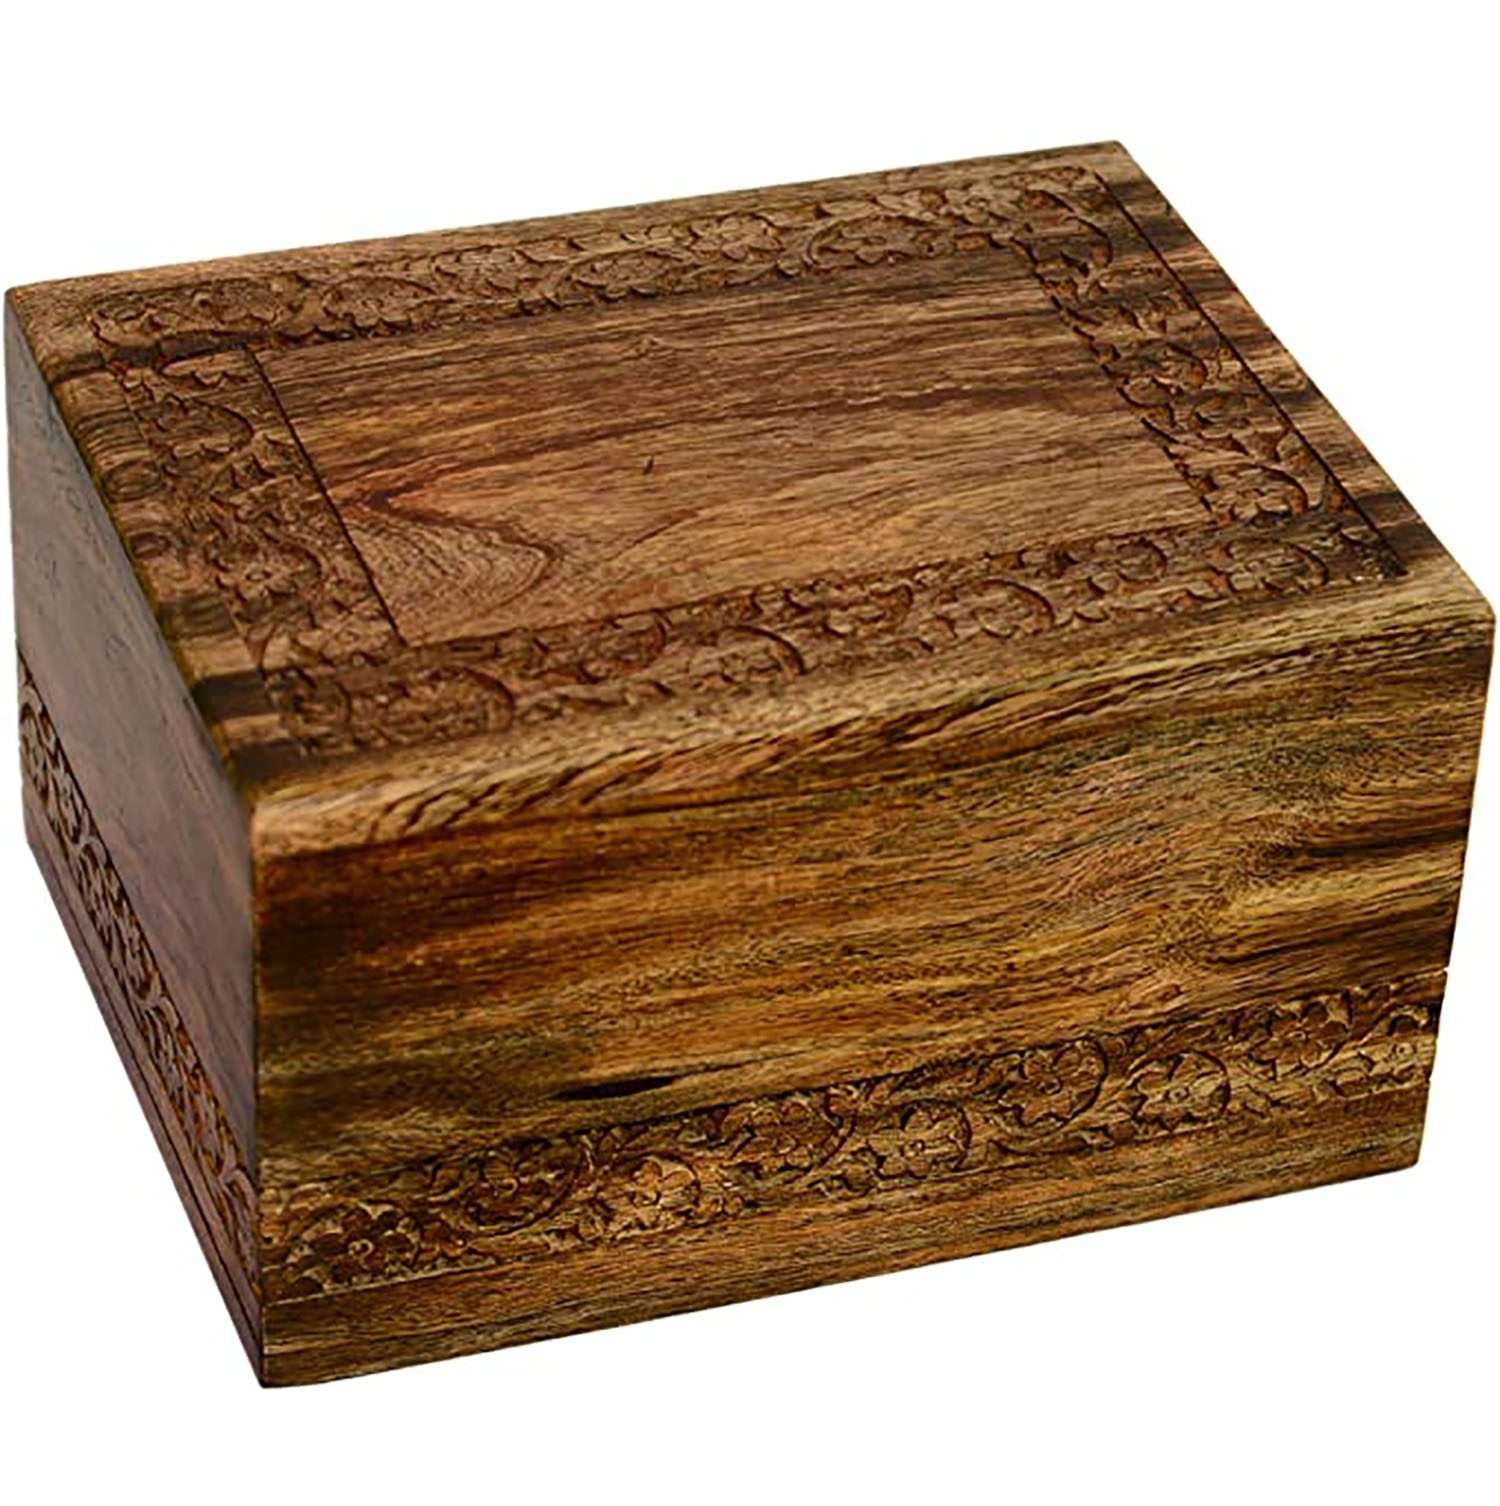 Hand carved Beautiful Cremation Urn Box | Urn Box for Human Ashes | Wood Urn Box manufacturer & supplier